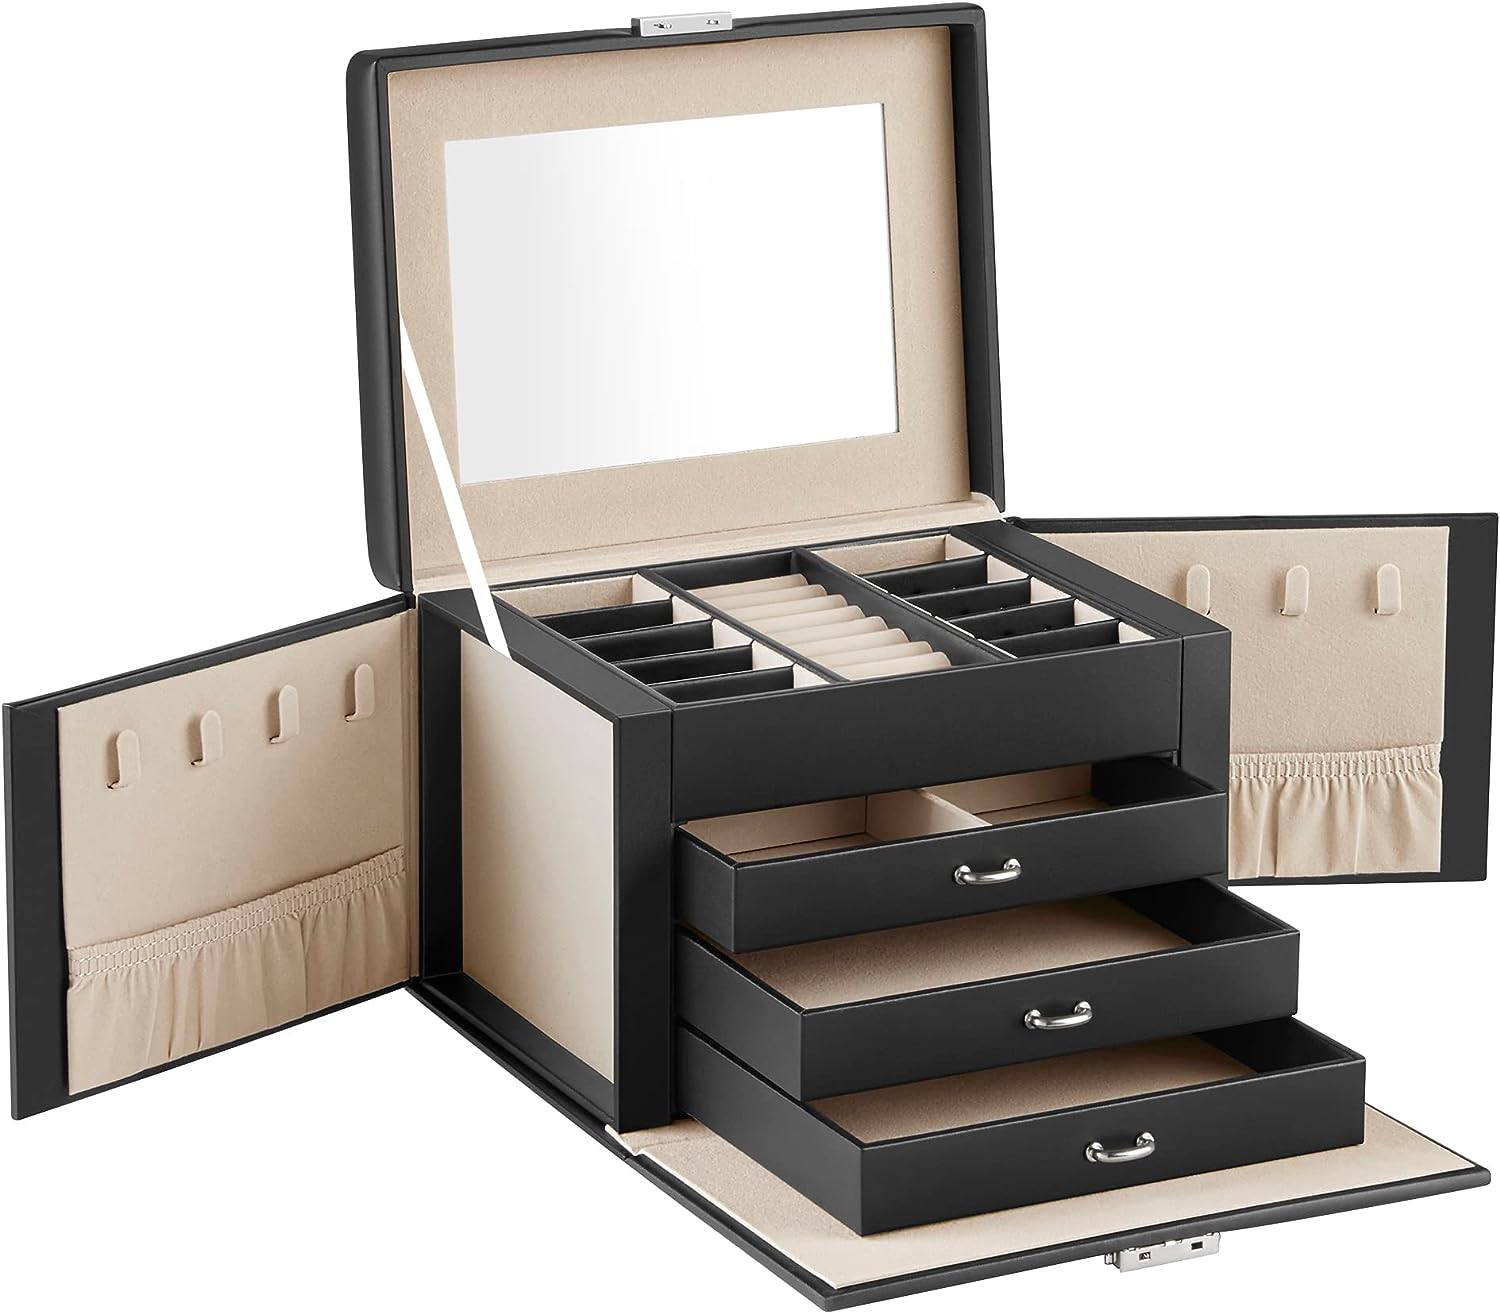 Blushbees® 3-Tier Jewelry Box - Black Modern Style with Mirror